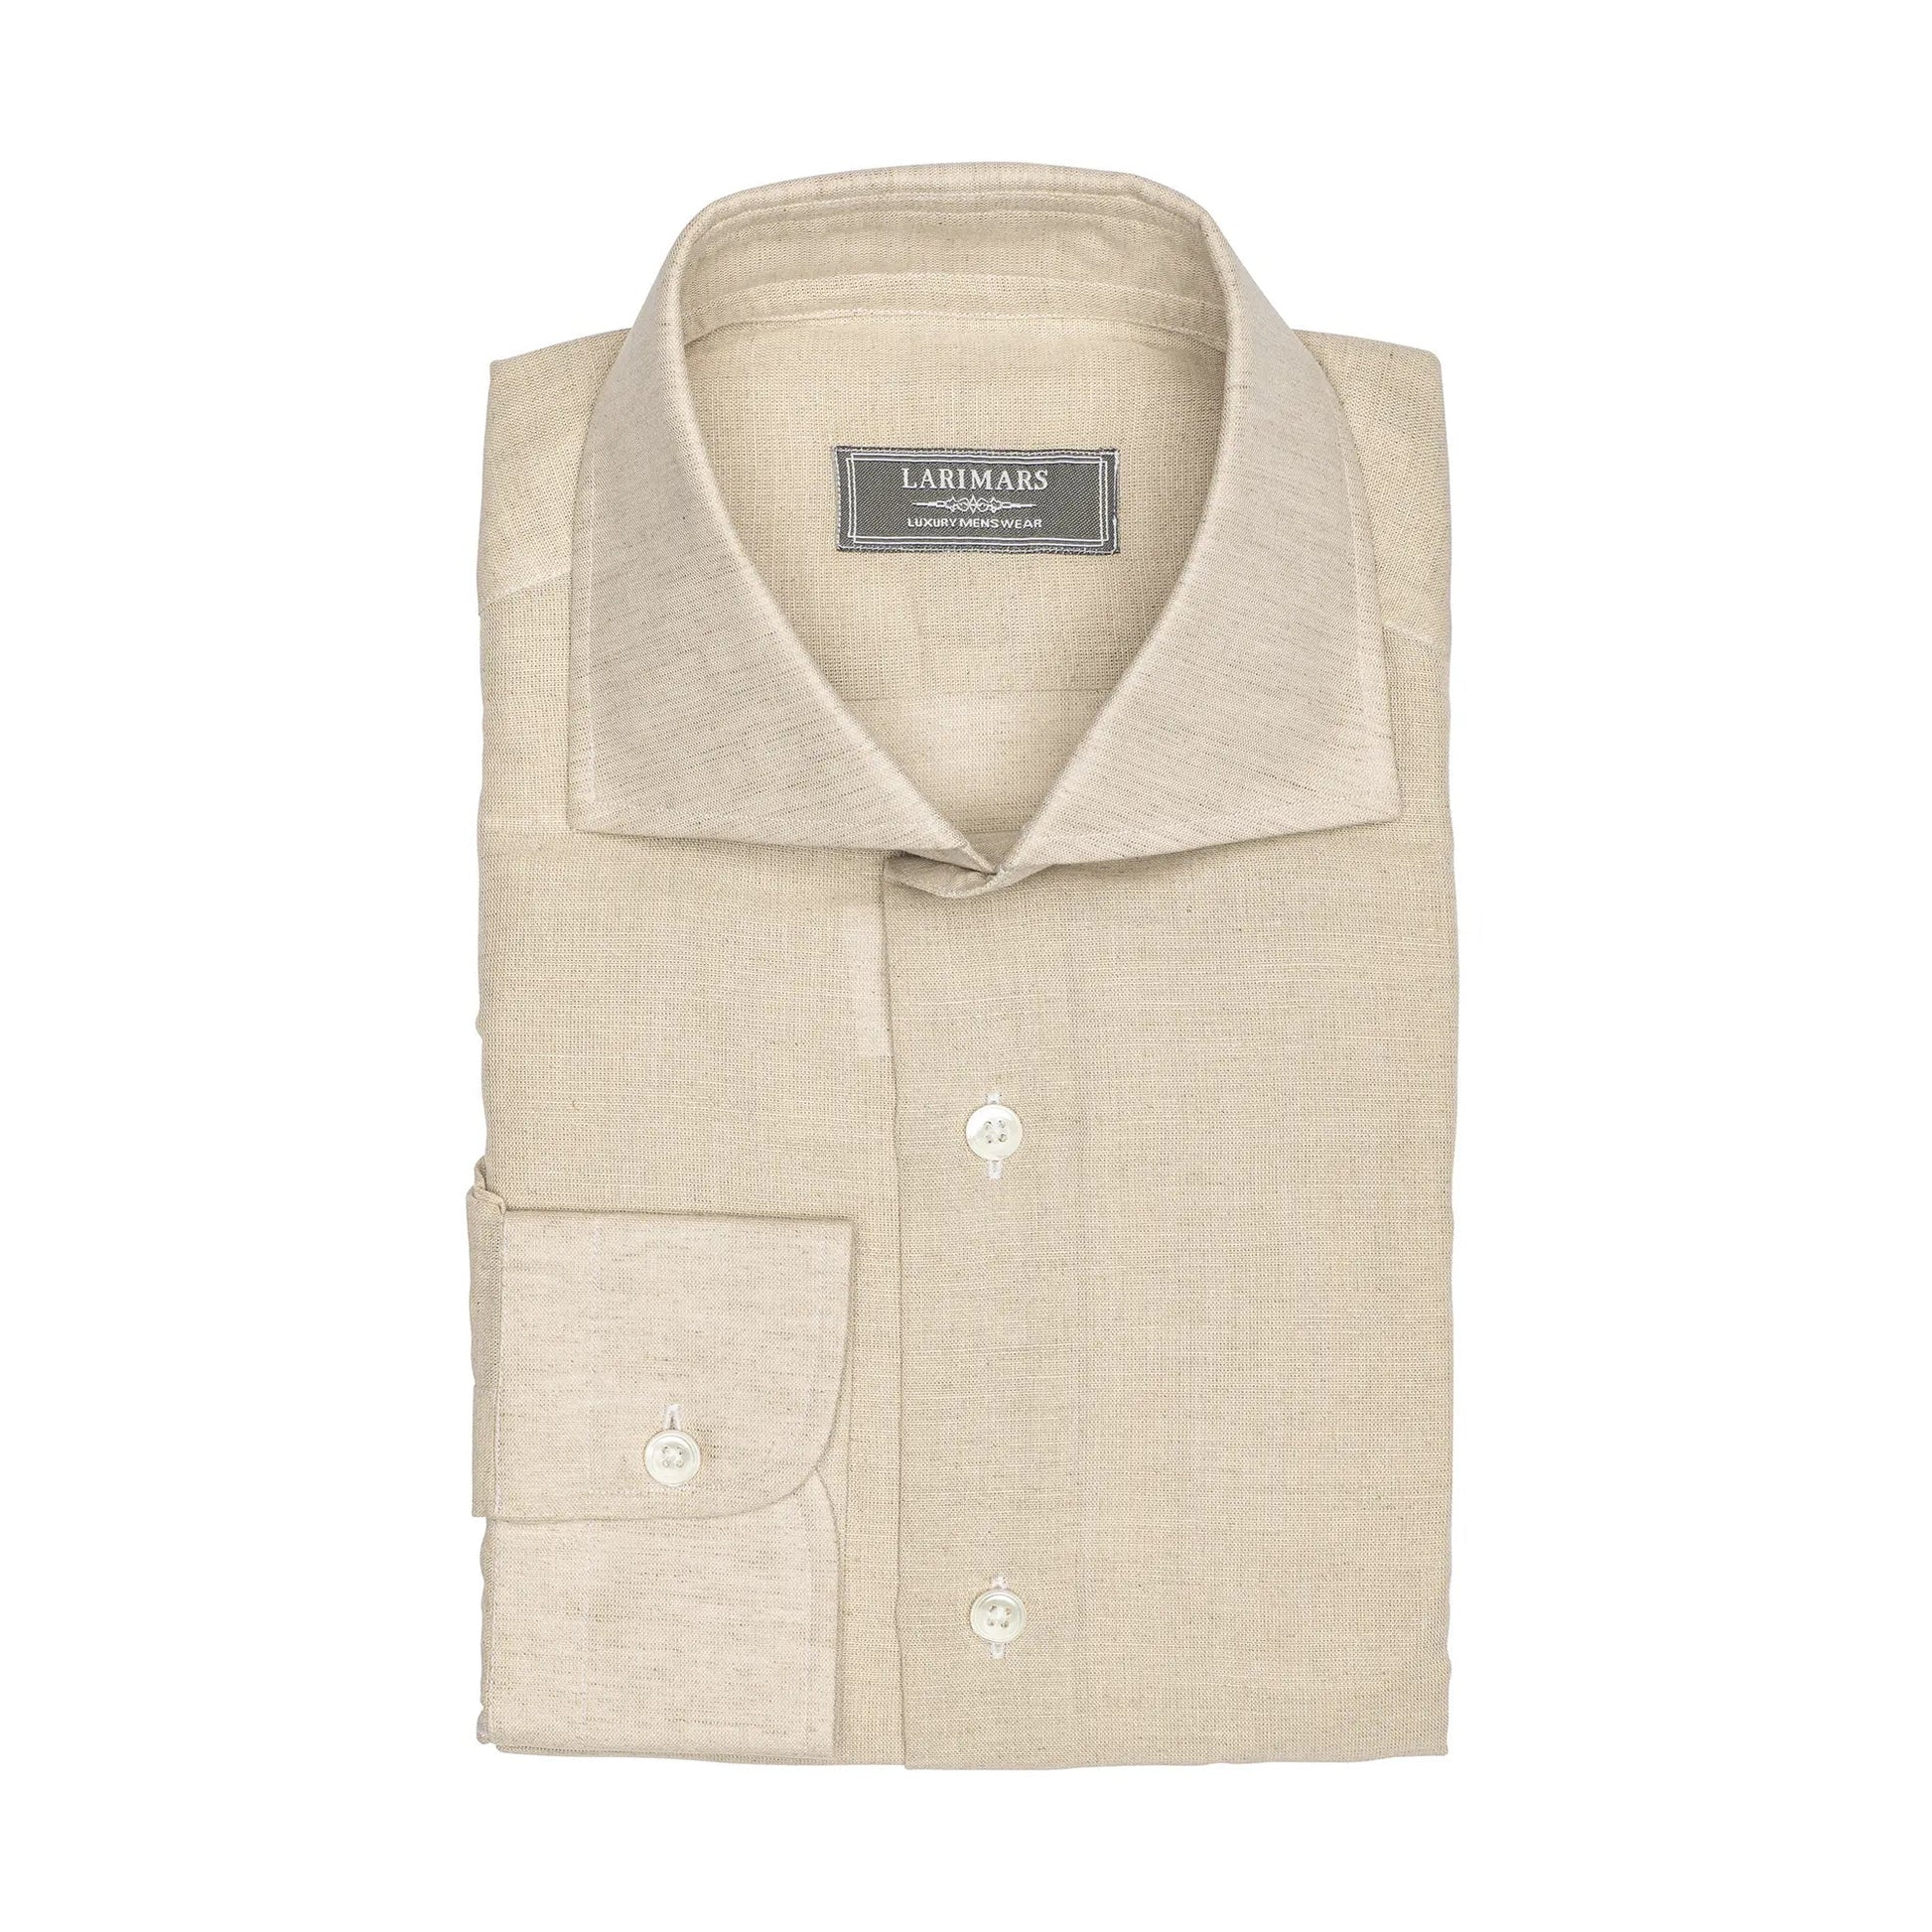 Beige Cotton Linen - Larimars Clothing Men's Formal and casual wear shirts